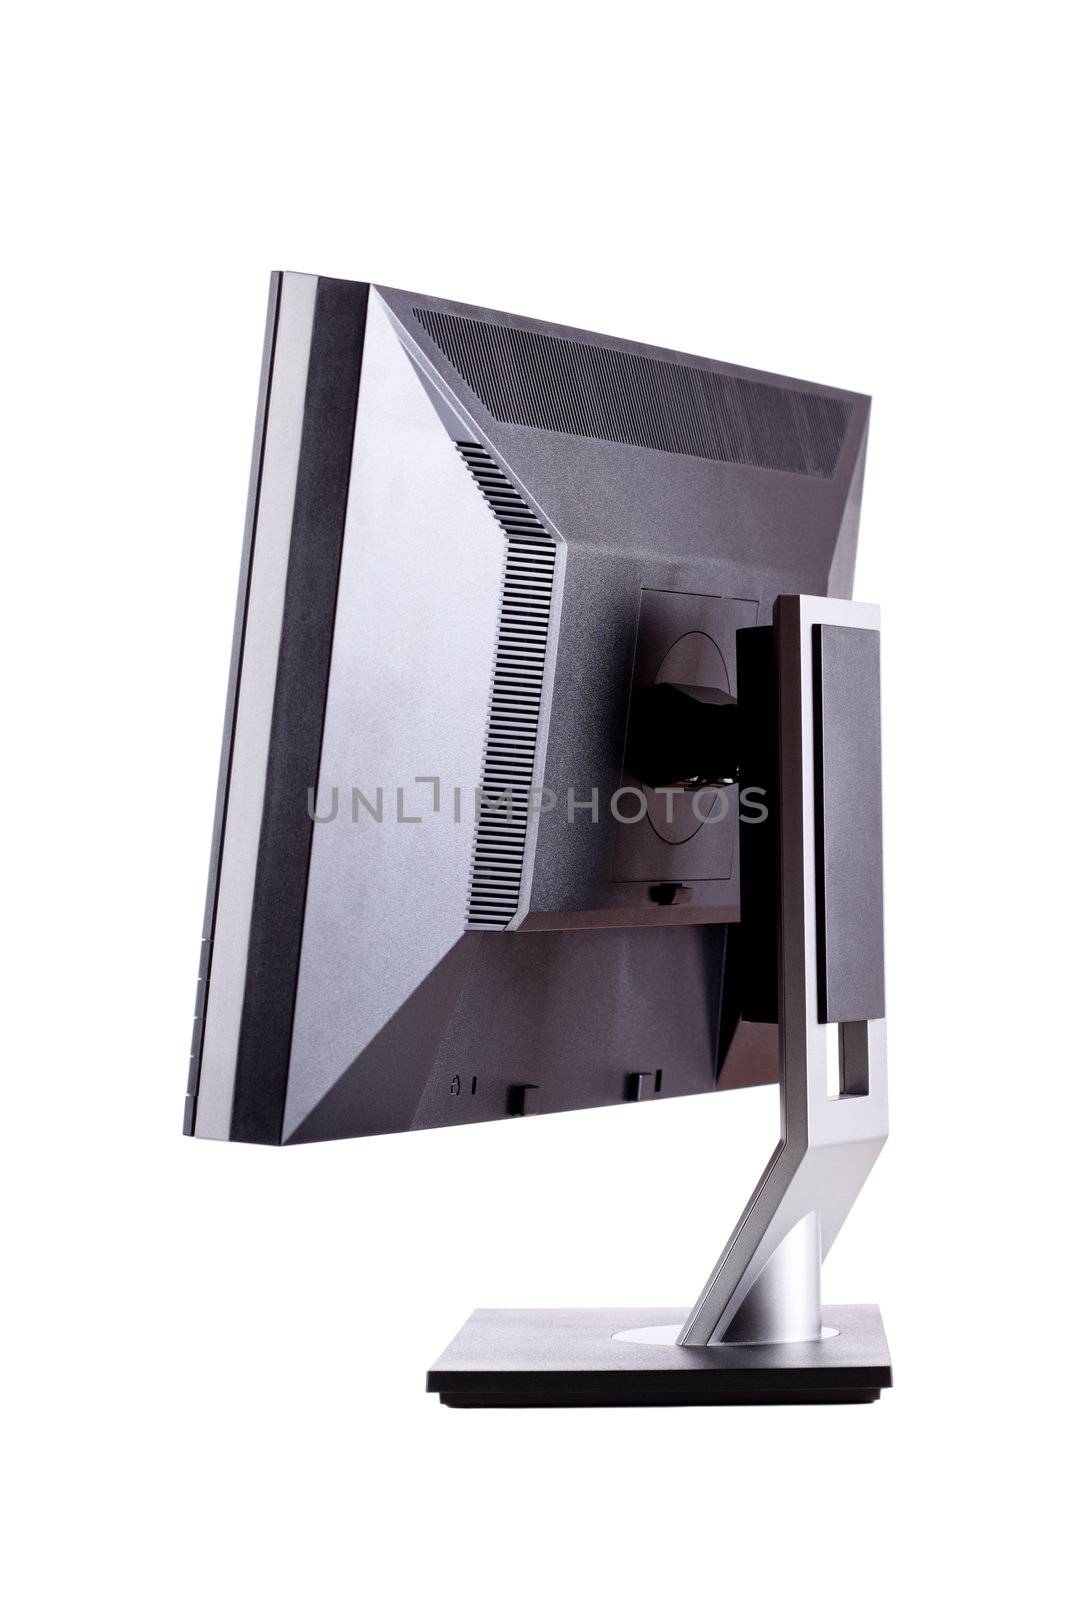 professional ips panel lcd monitor, back side, isolated on white